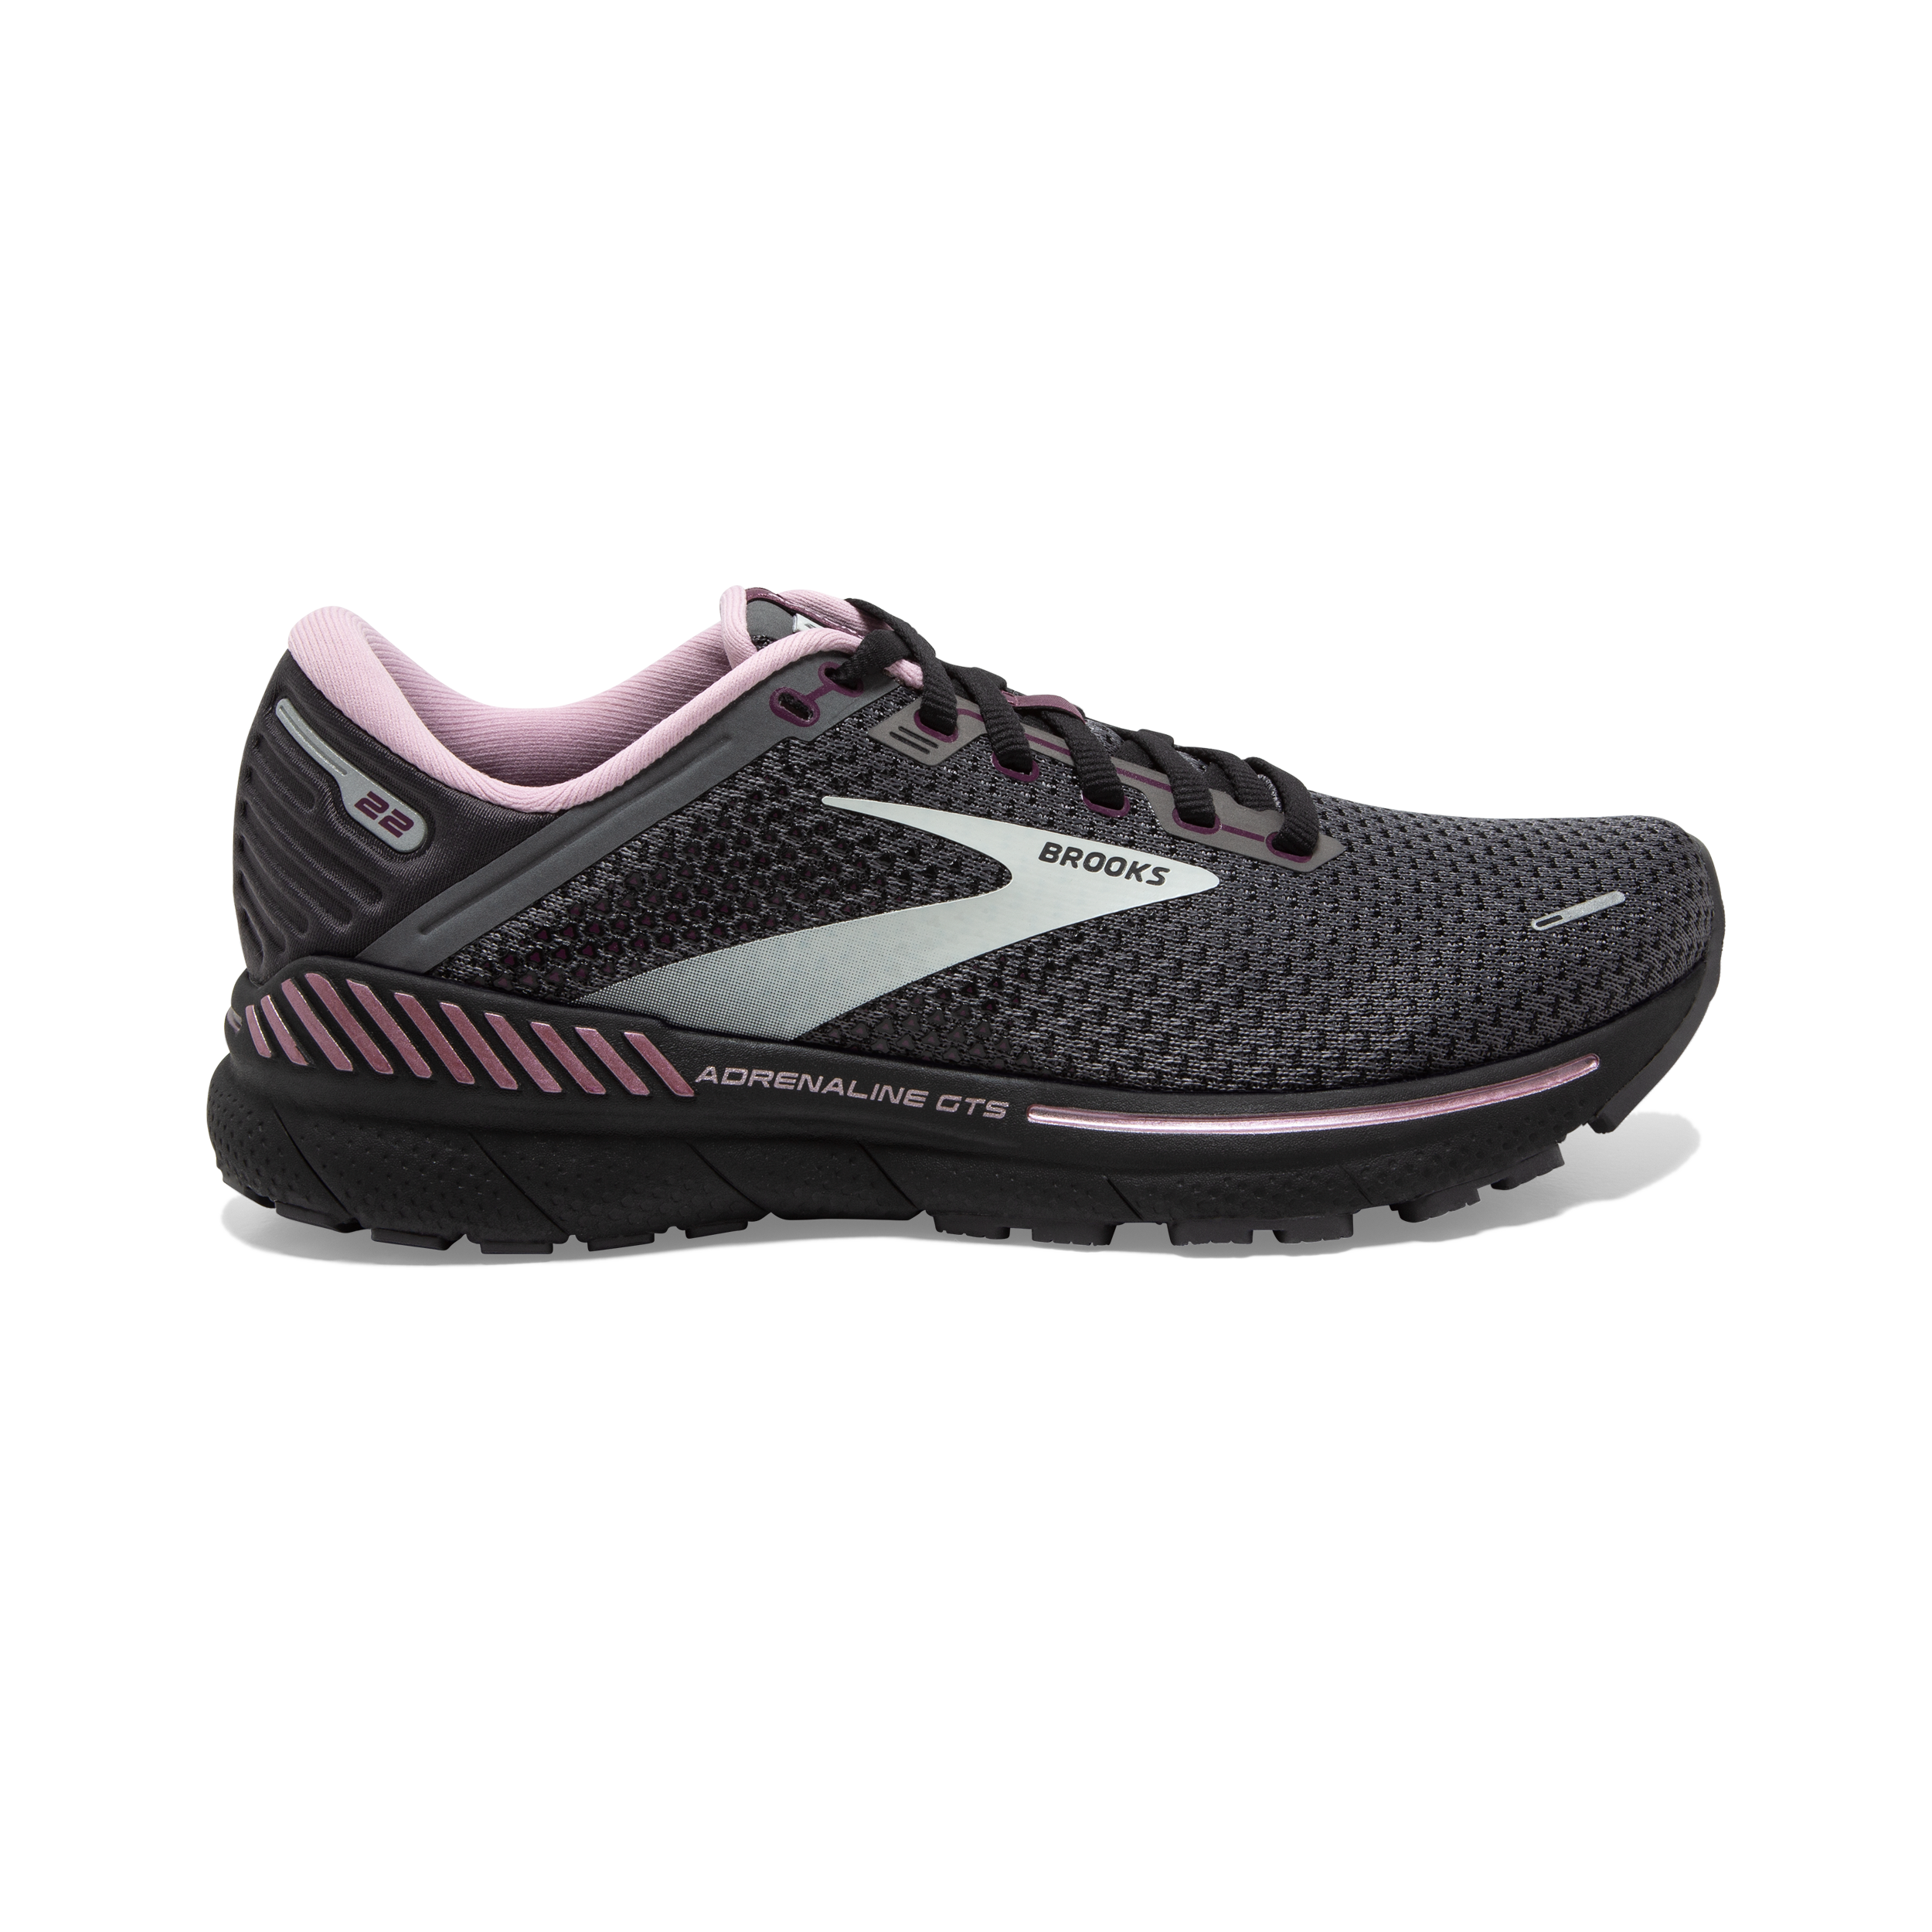 Where to Buy Cheap Brooks Shoes?